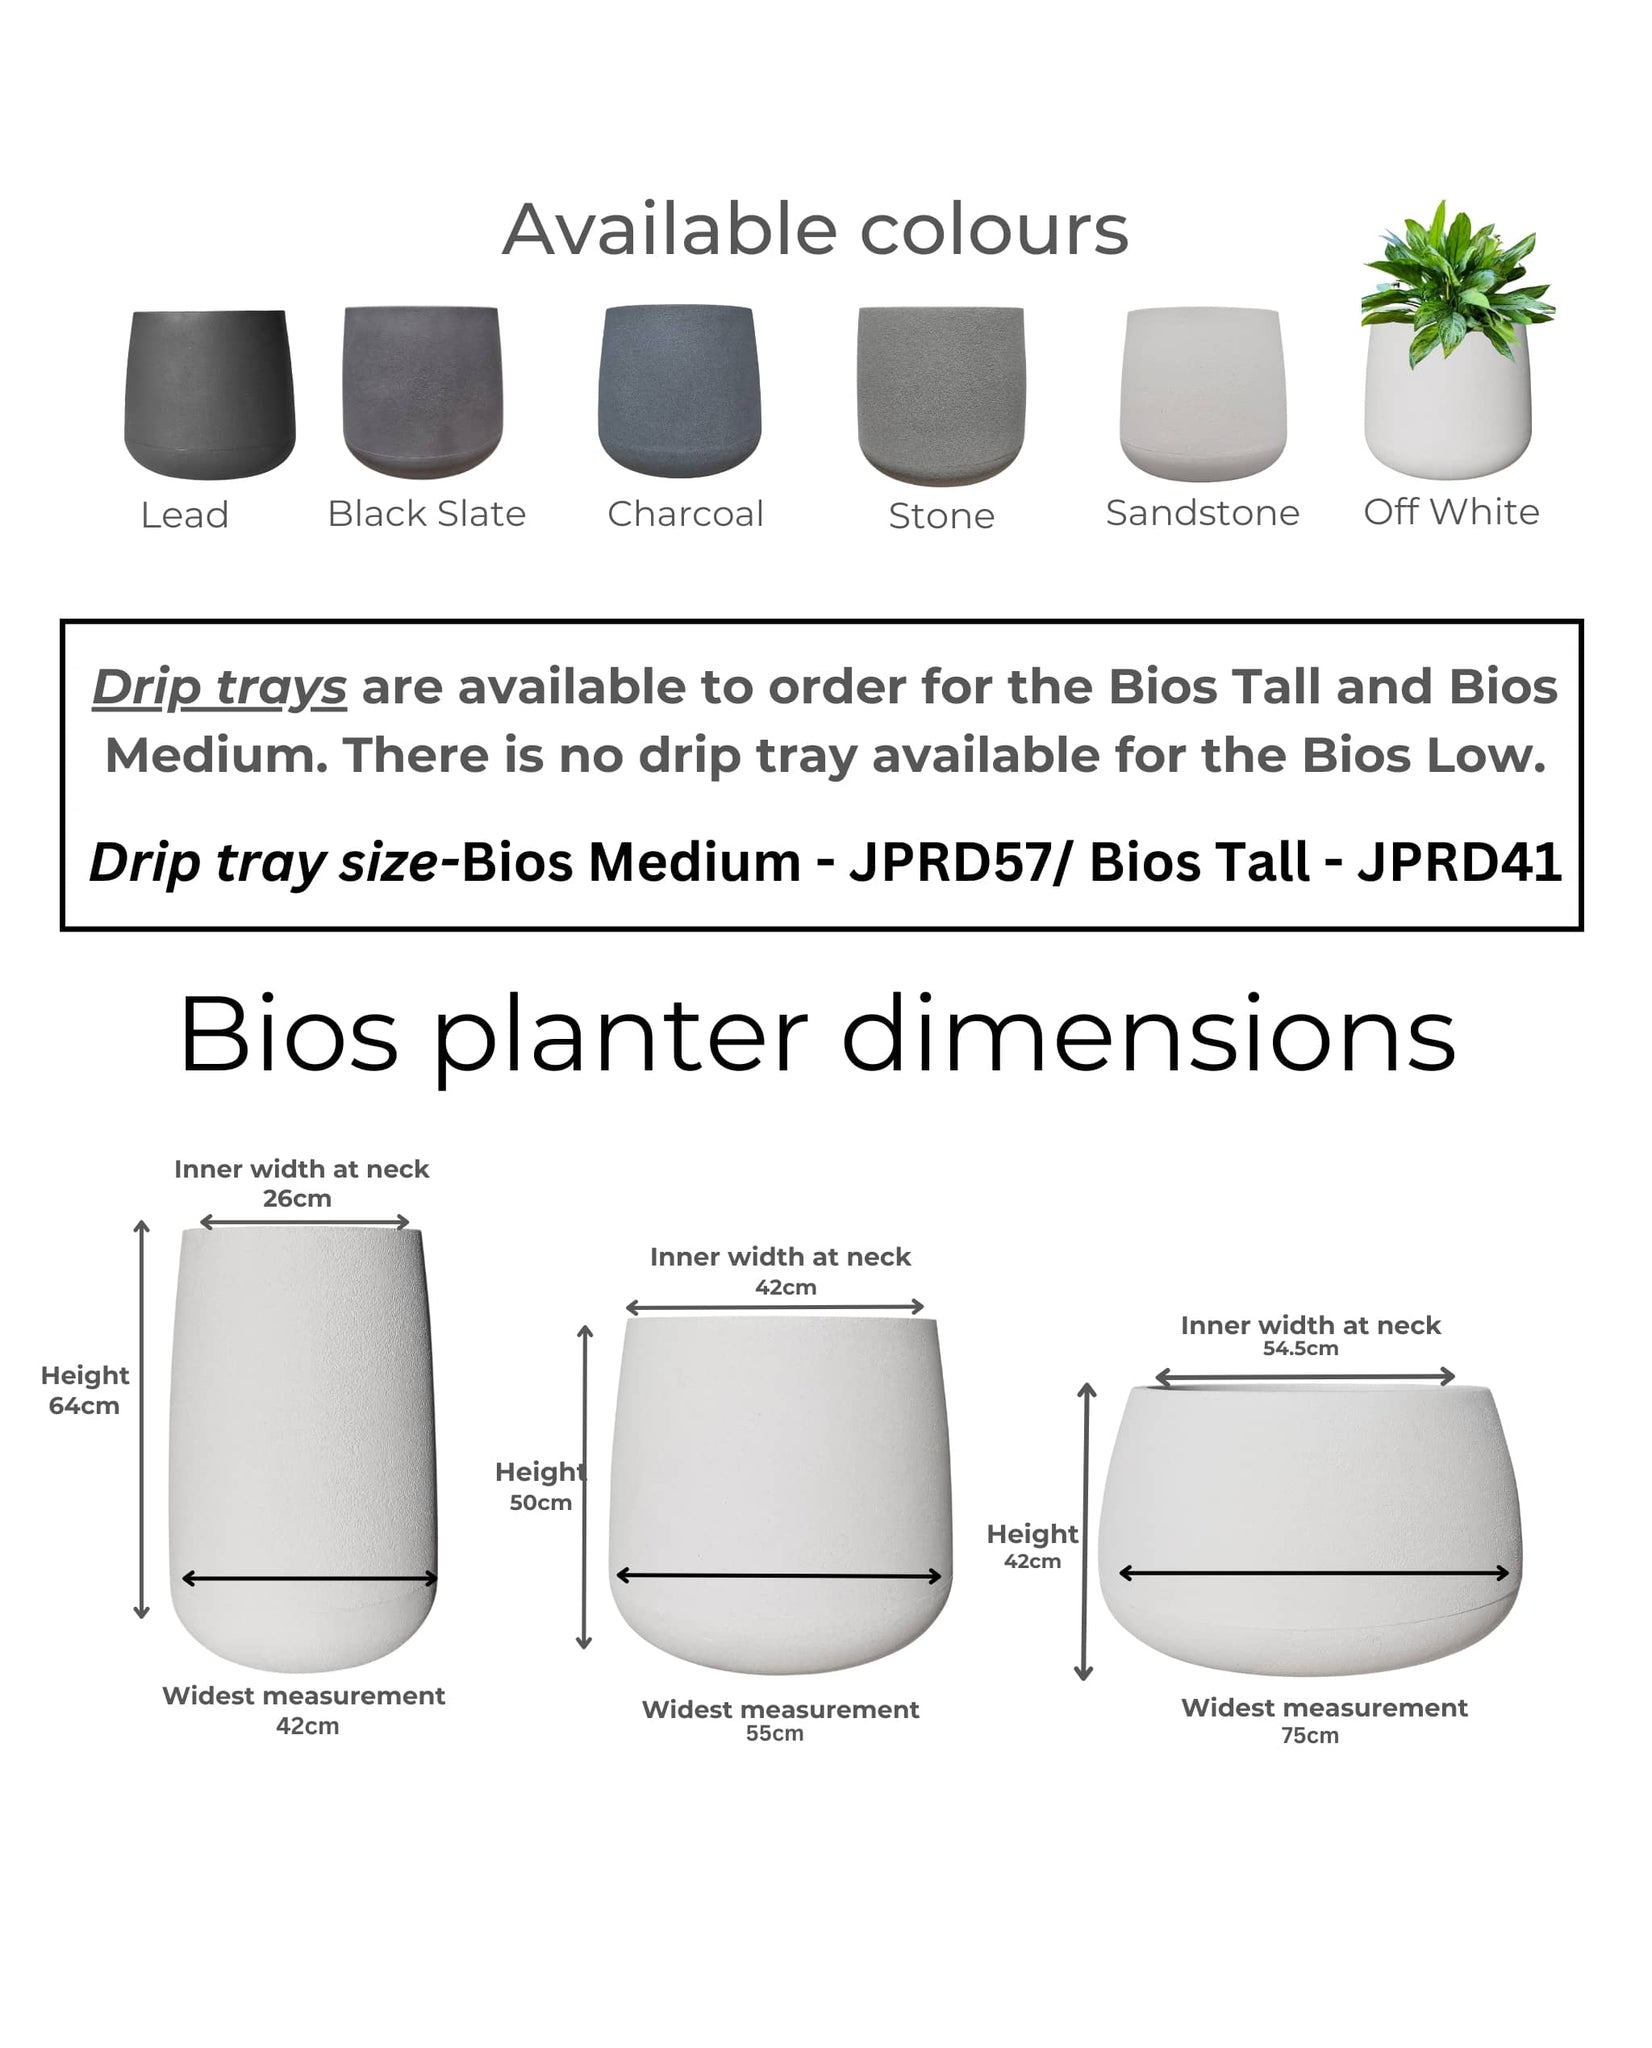 Dimensions of the tall, medium and low Bios planters. Drip trays available to purchase separately at Florastyle by Hingham.